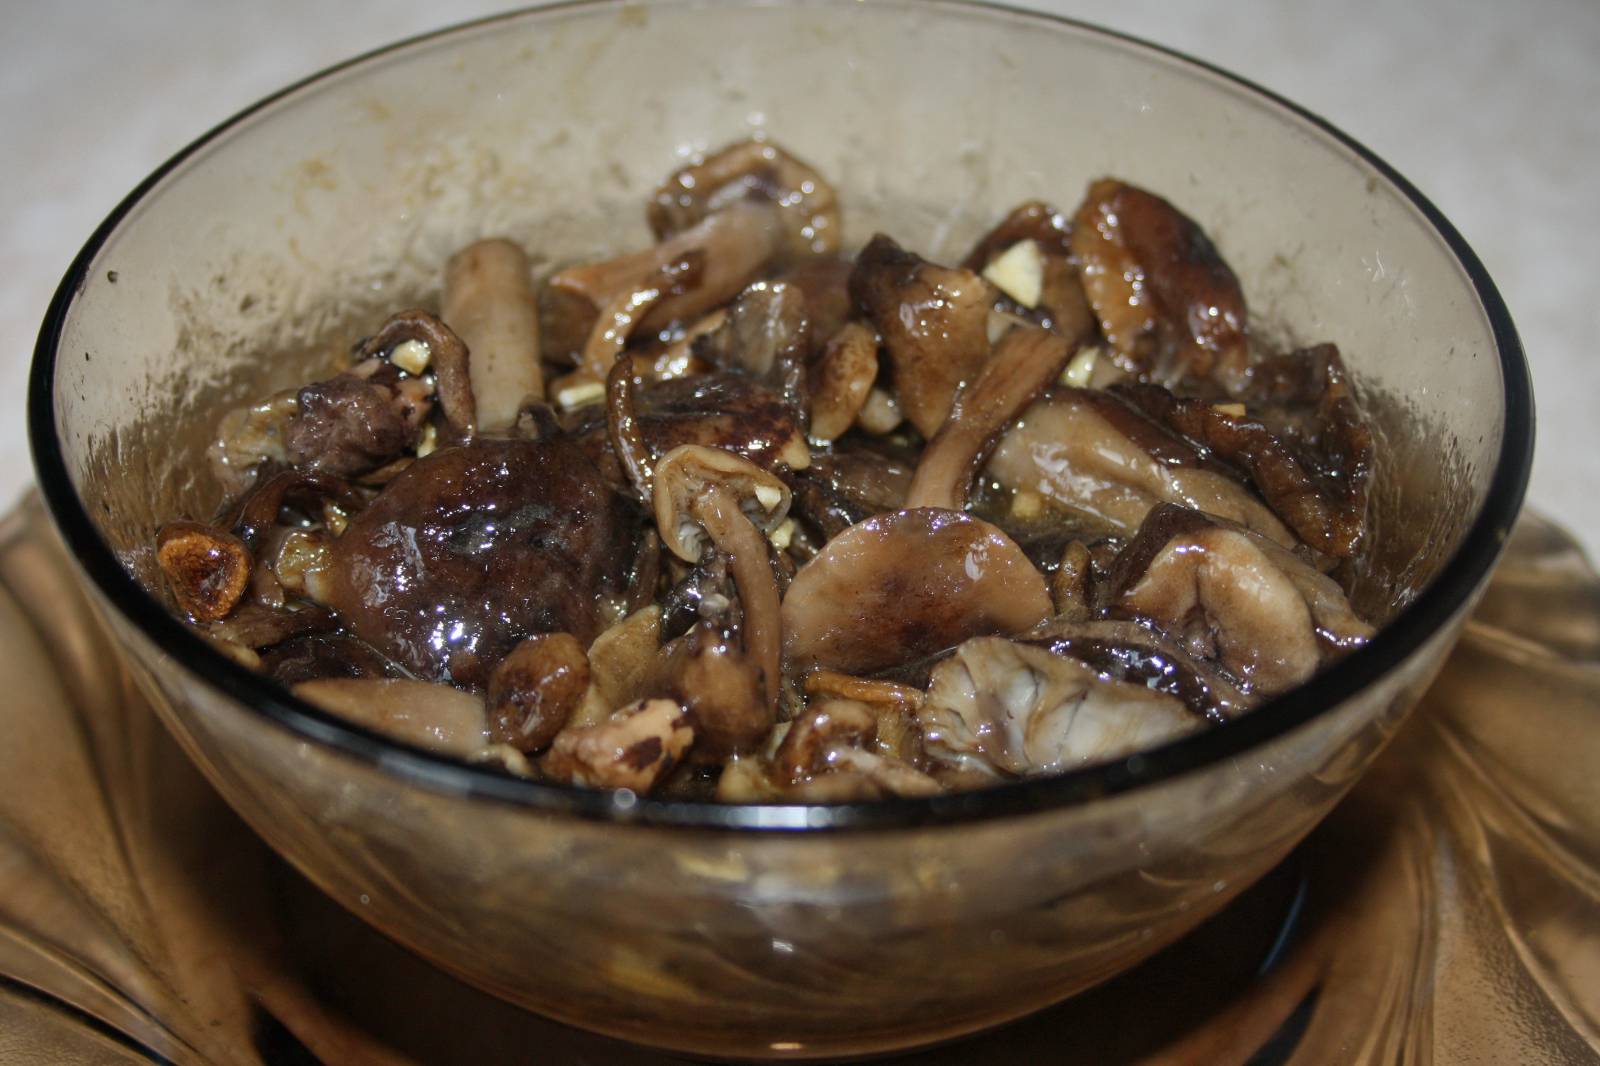 Mushrooms fried in oil for the winter